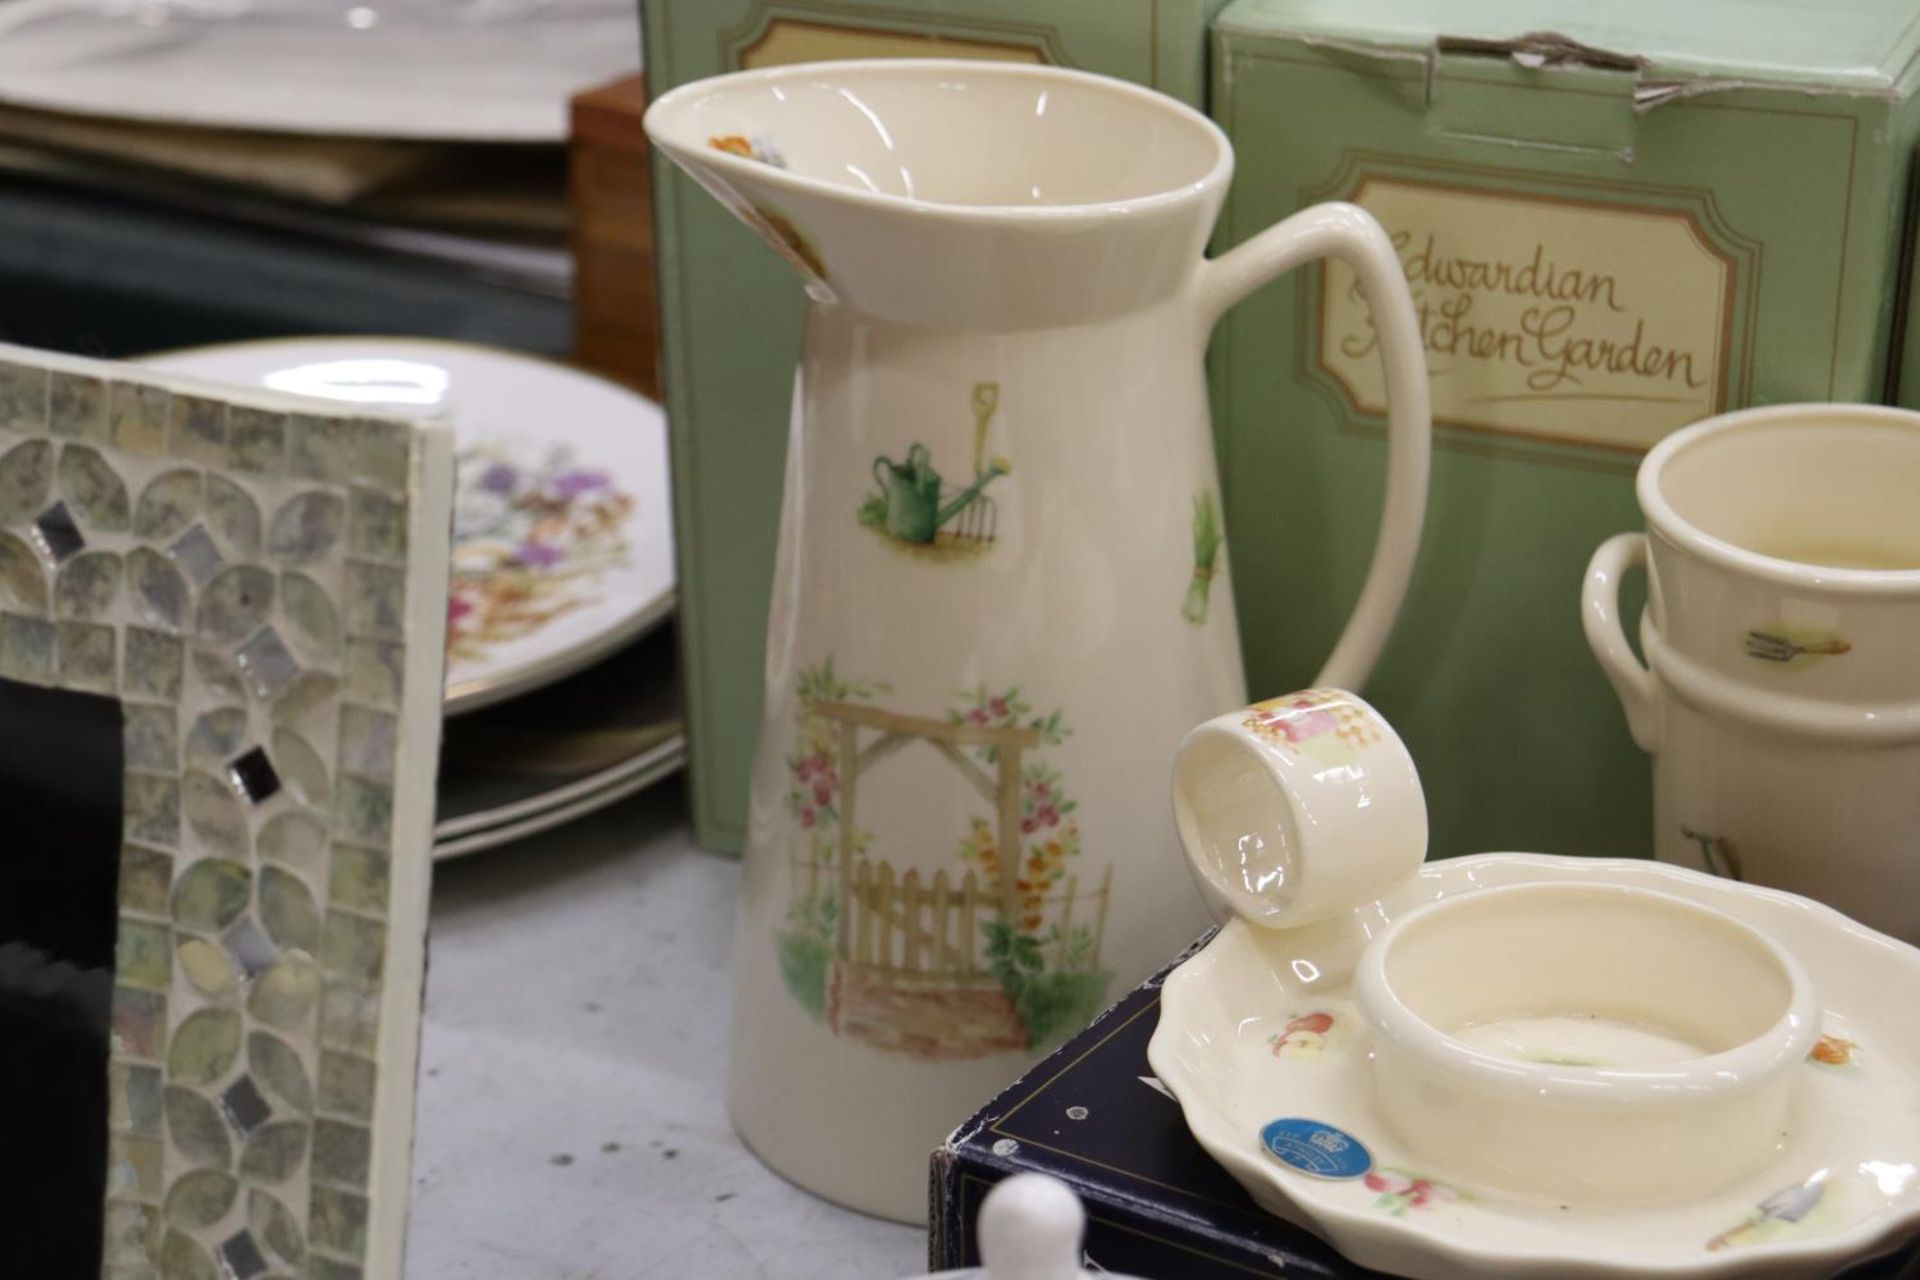 A QUANTITY OF CERAMIC ITEMS, MOSTLY BOXED TO INCLUDE AYNSLEY EDWARDIAN KITCHEN GARDEN, JUG, VASE AND - Image 10 of 10